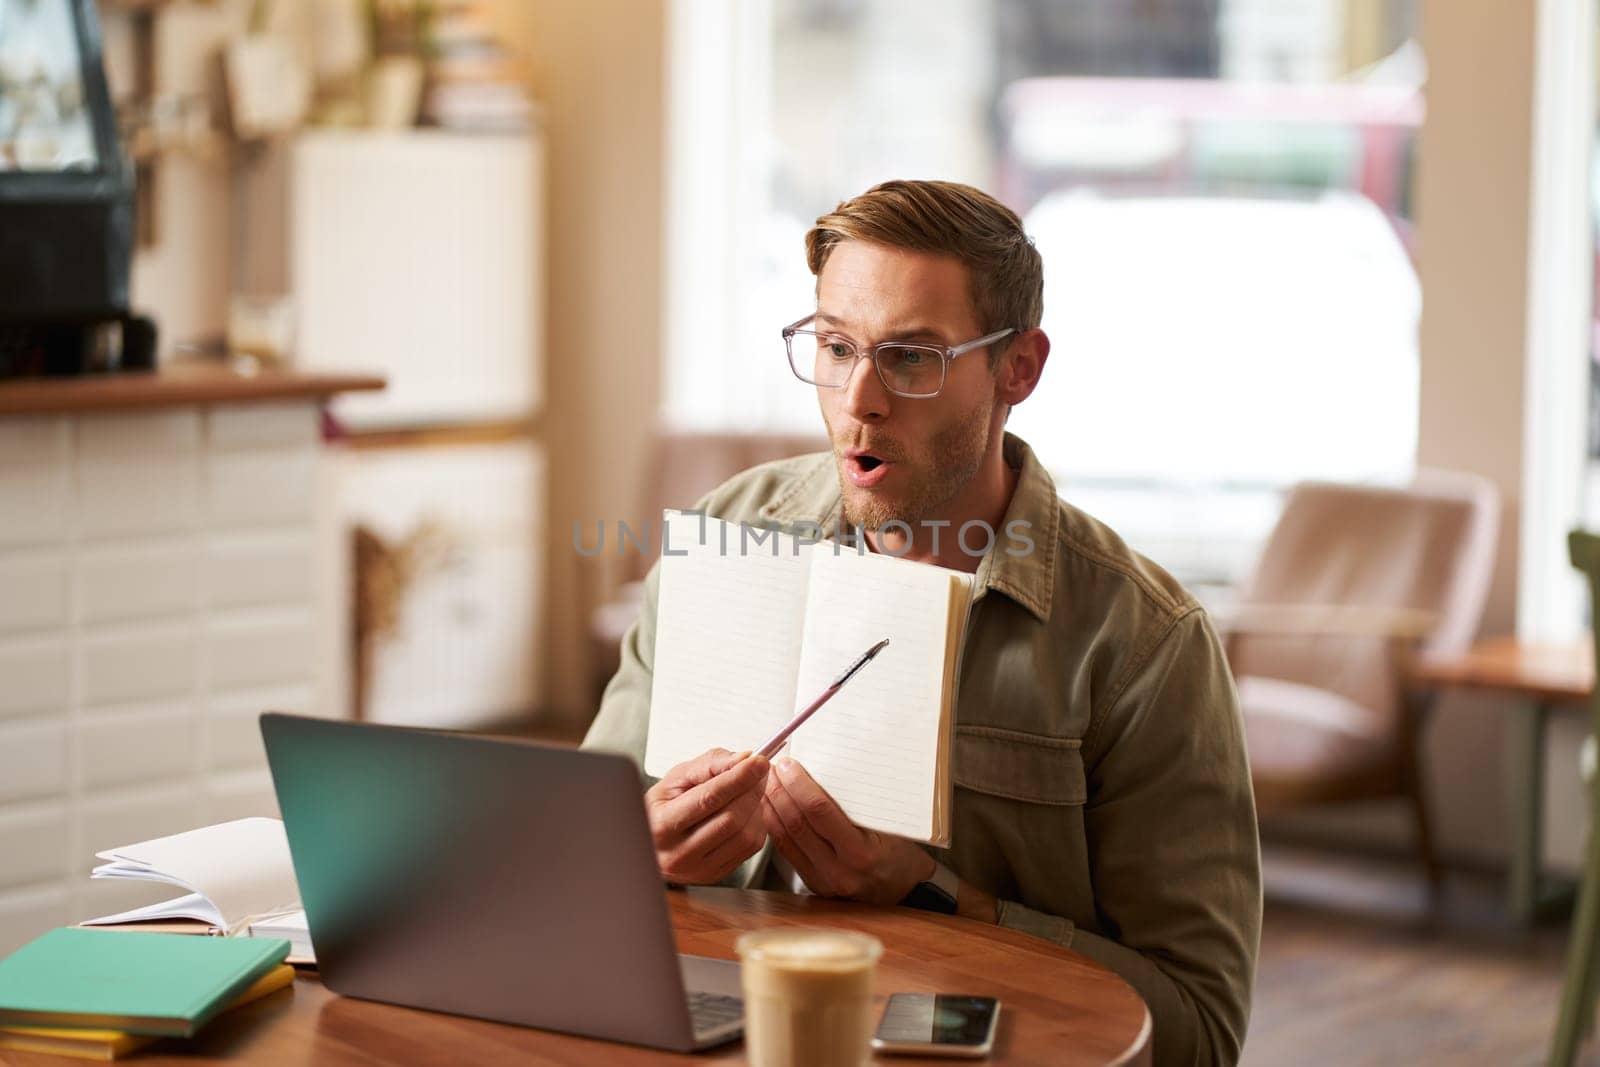 Portrait of handsome young man giving lessons online, showing exercises in his notebook, looking at laptop, recording video, sitting in cafe, quite co-working space.